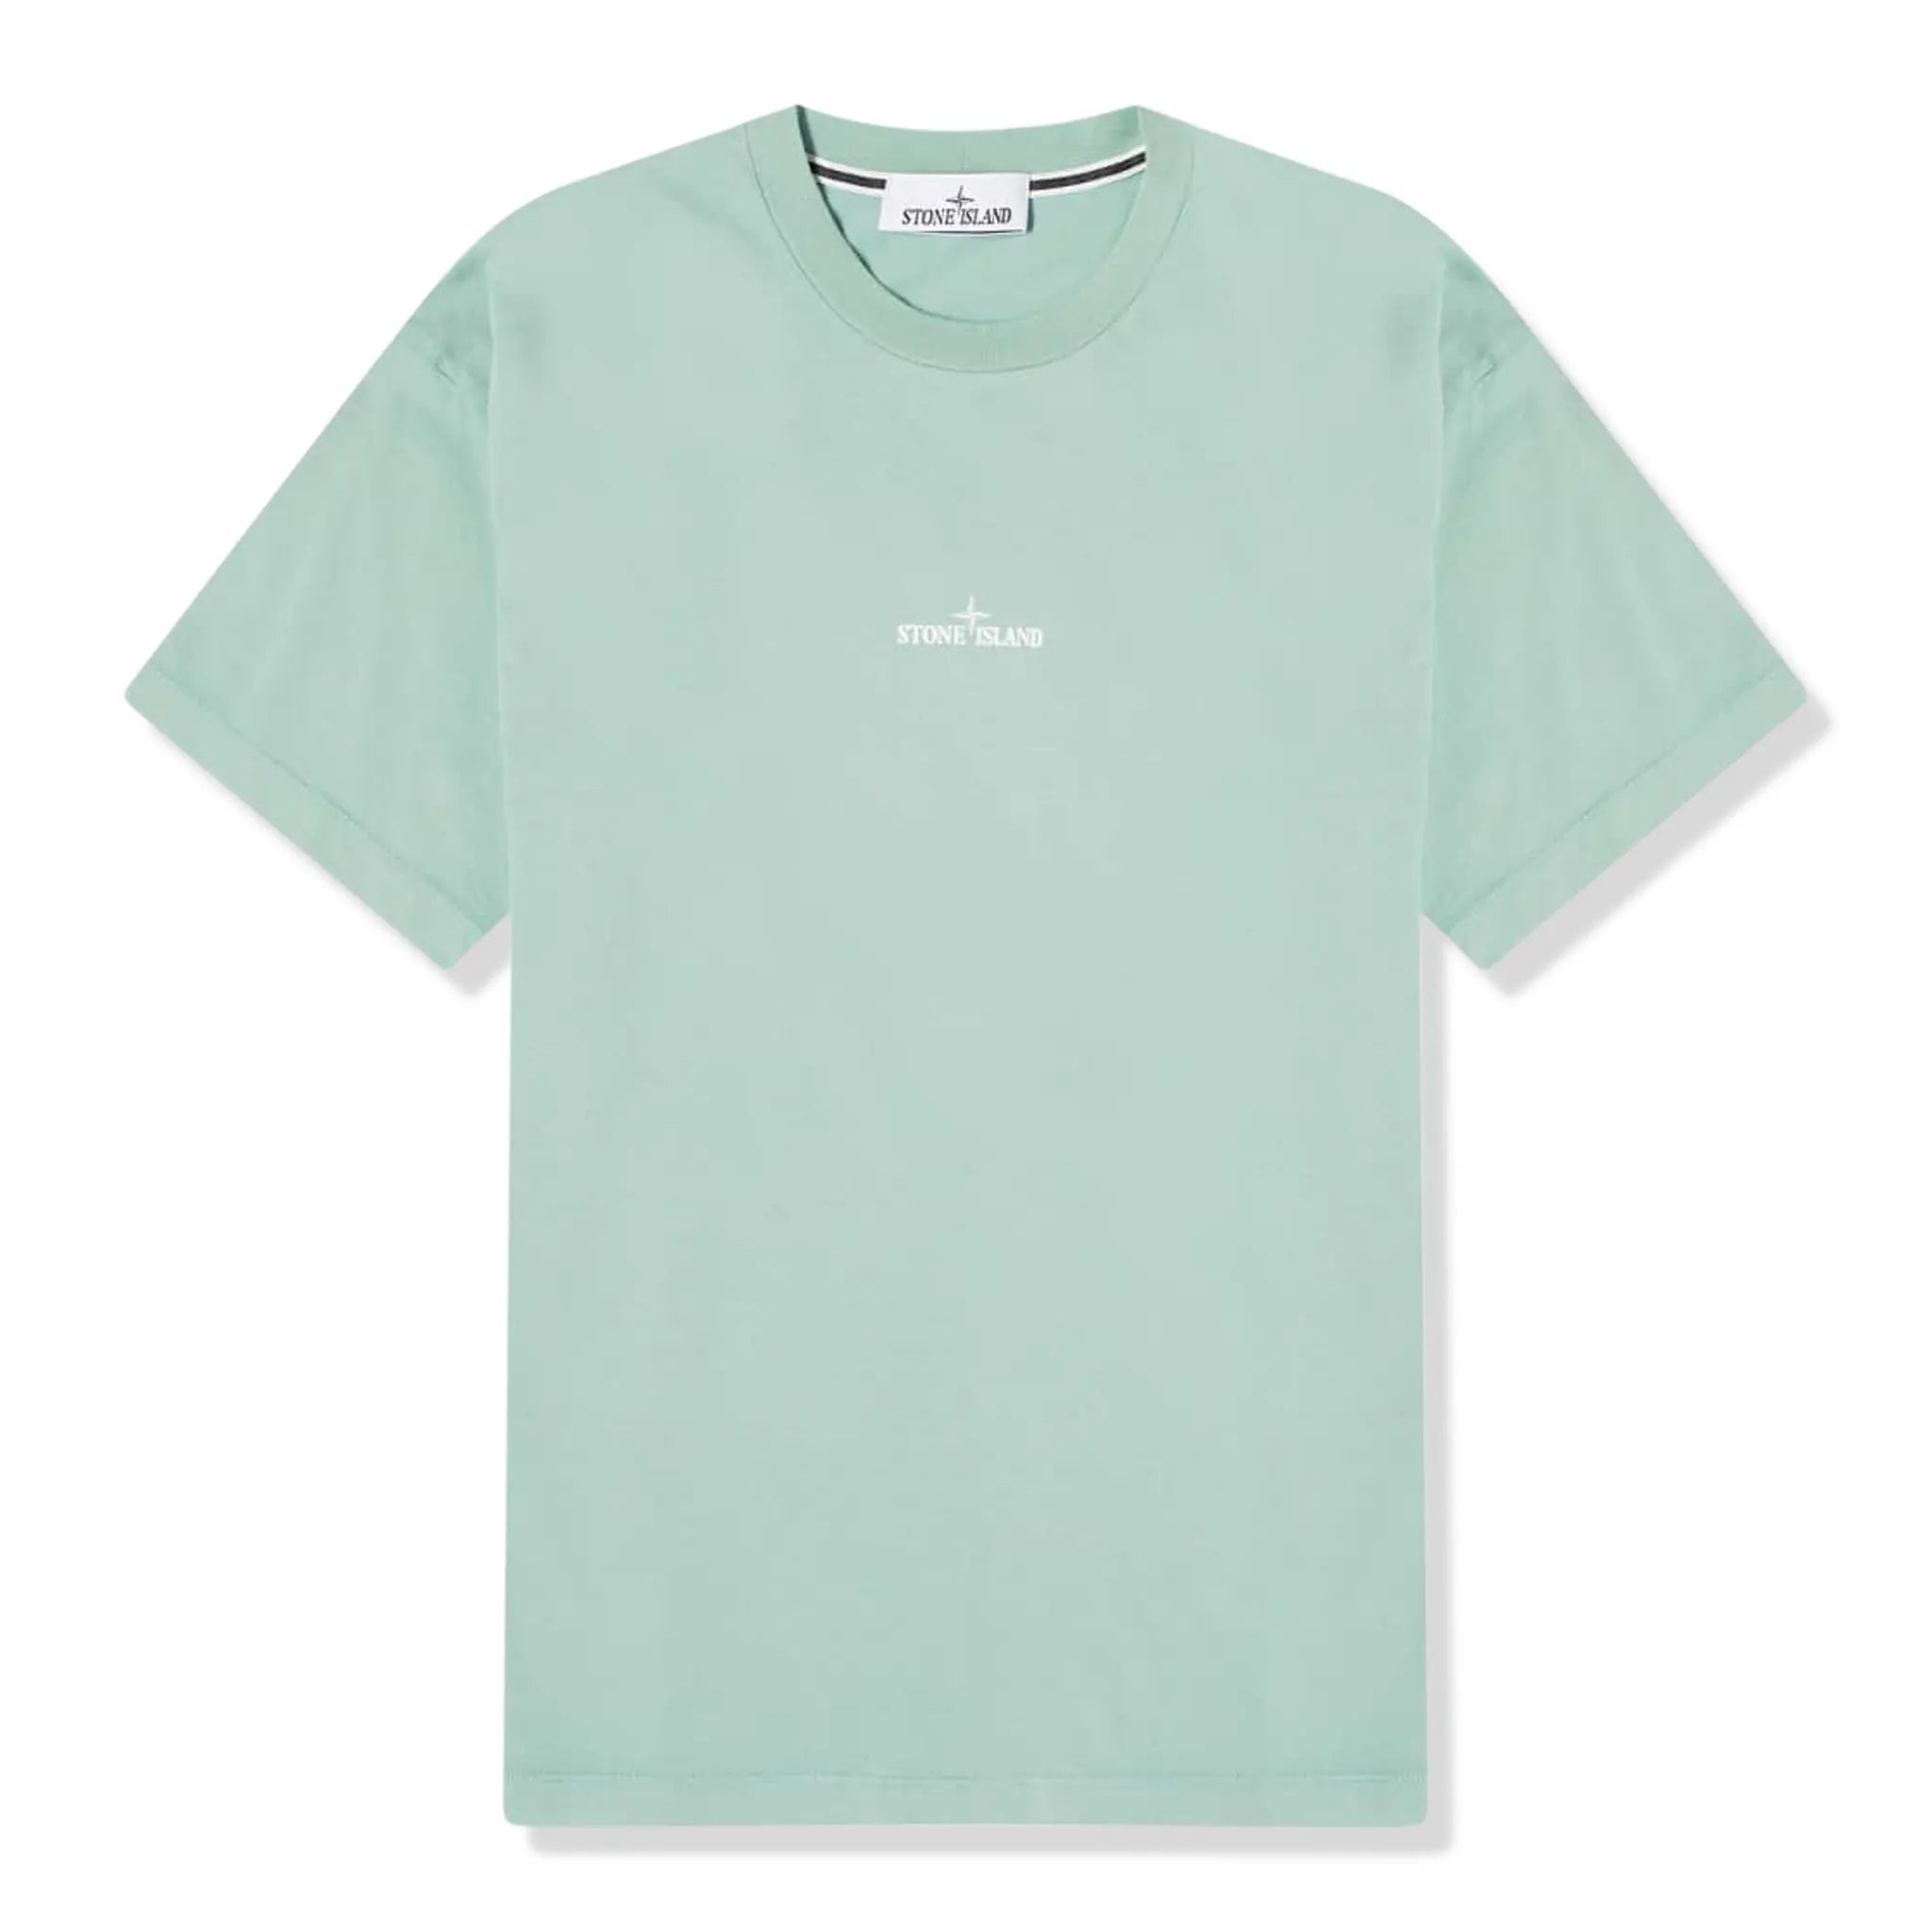 Front view of Stone Island Paint 1 Short Sleeved Green T Shirt 80152RC89-V0052